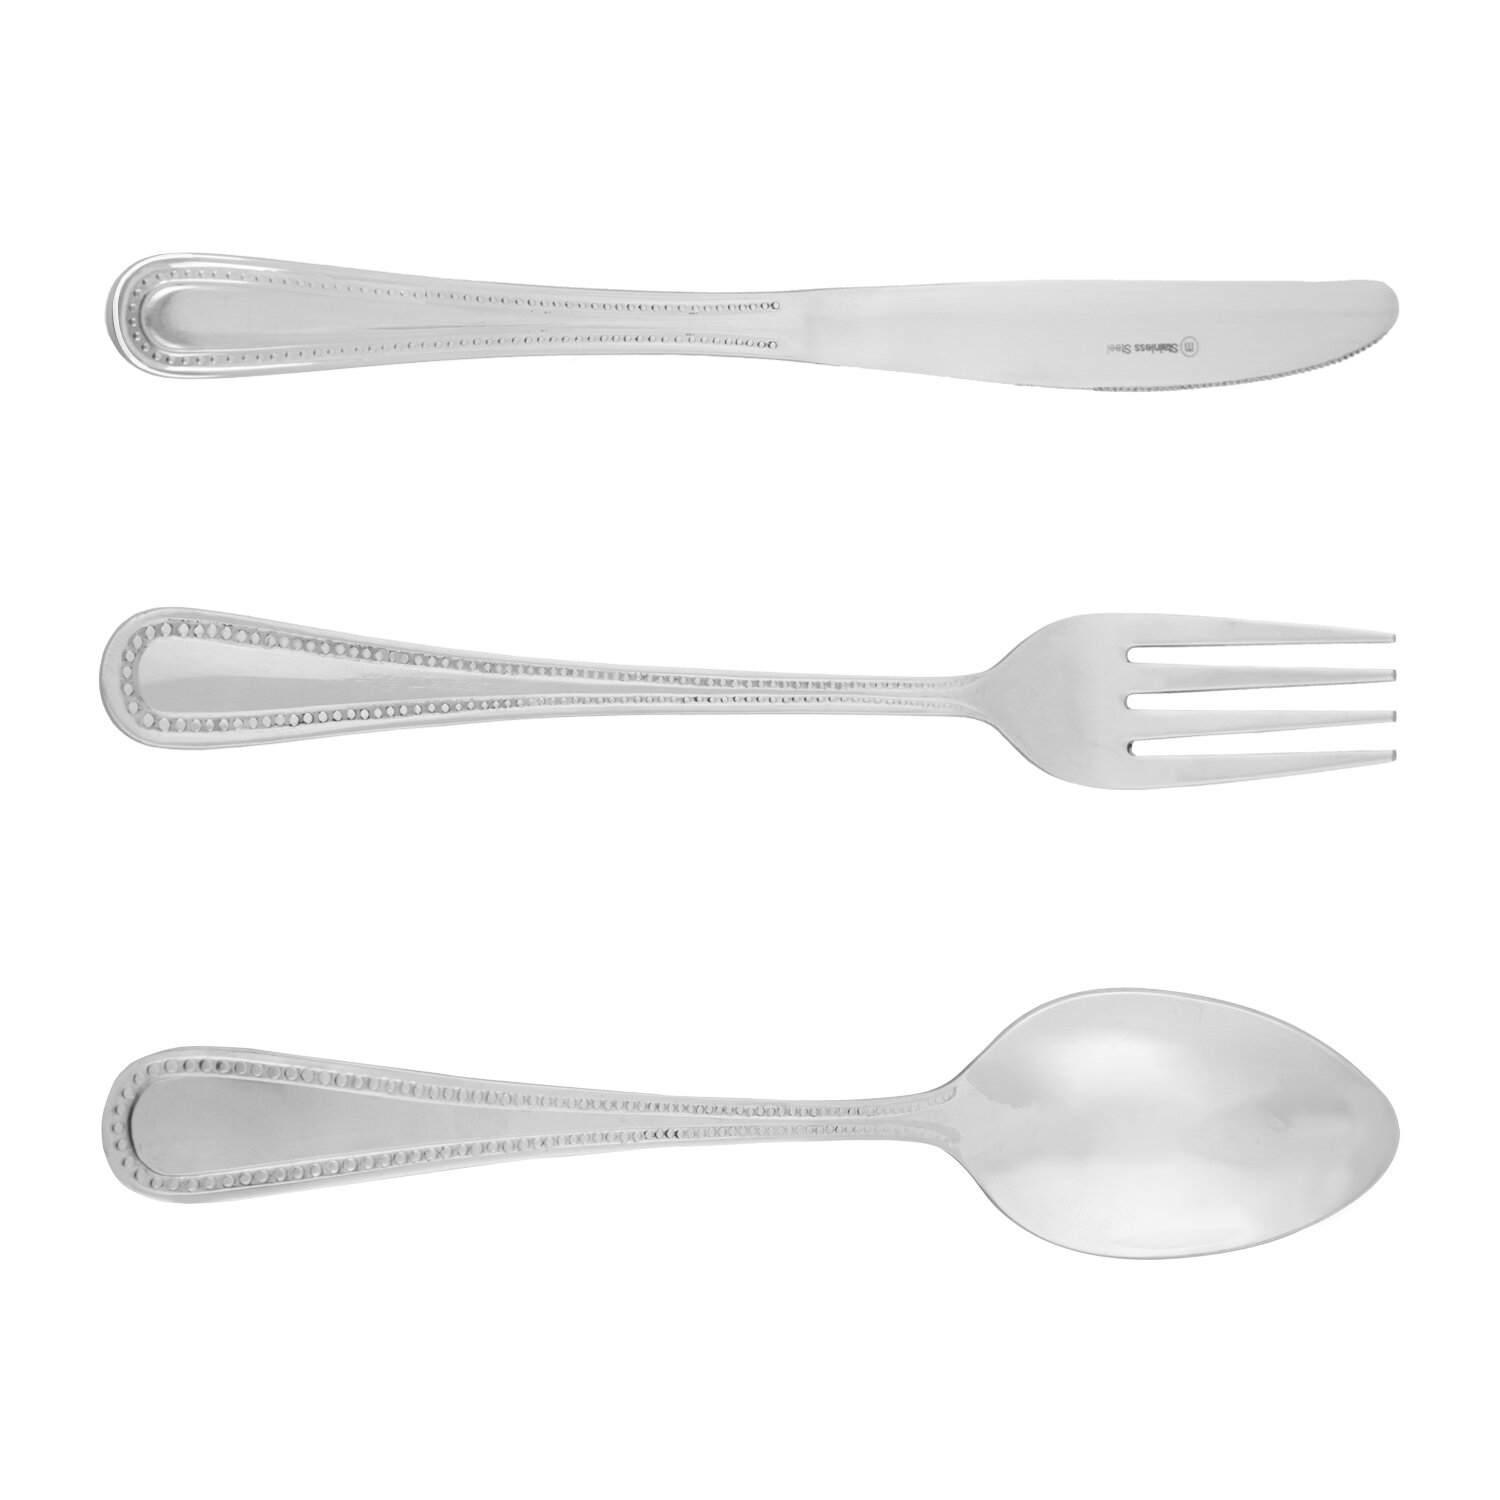 Melange Catereco Stainless Steel Flatware Set - Service for 96